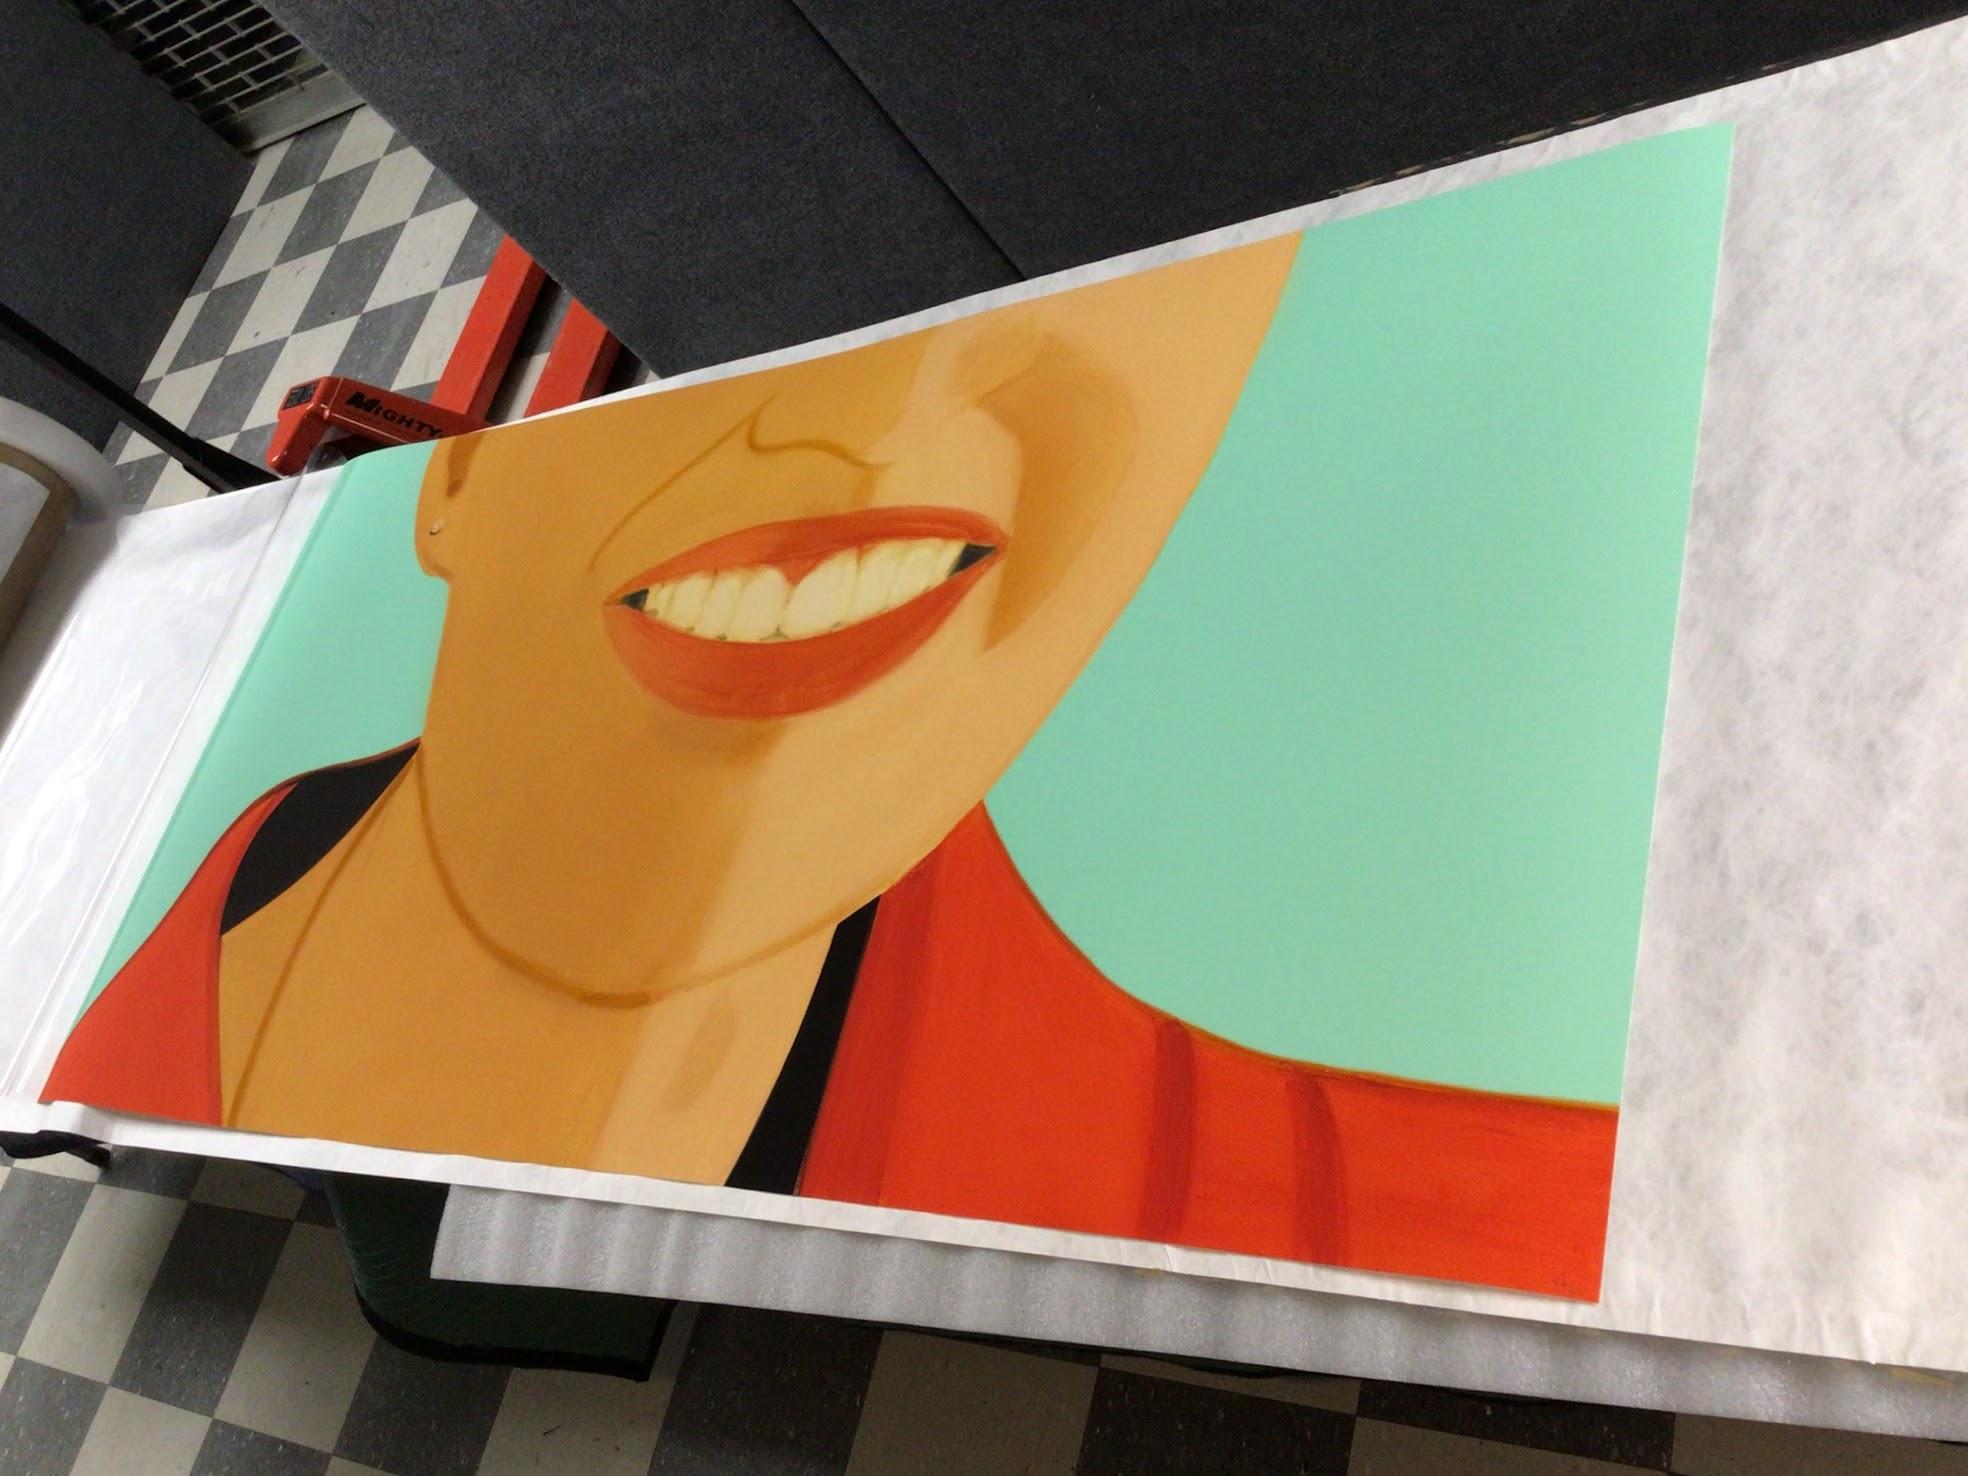 ALEX KATZ (1927-Present)

Alex Katz's 'Big Smile (Vivien)' is a 2021 color archival pigment ink on Innova Etching Cotton Rag 315 gsm fine art paper. This print is signed and numbered '46/100' published by Lococo Fine Art, Saint Louis. It is in